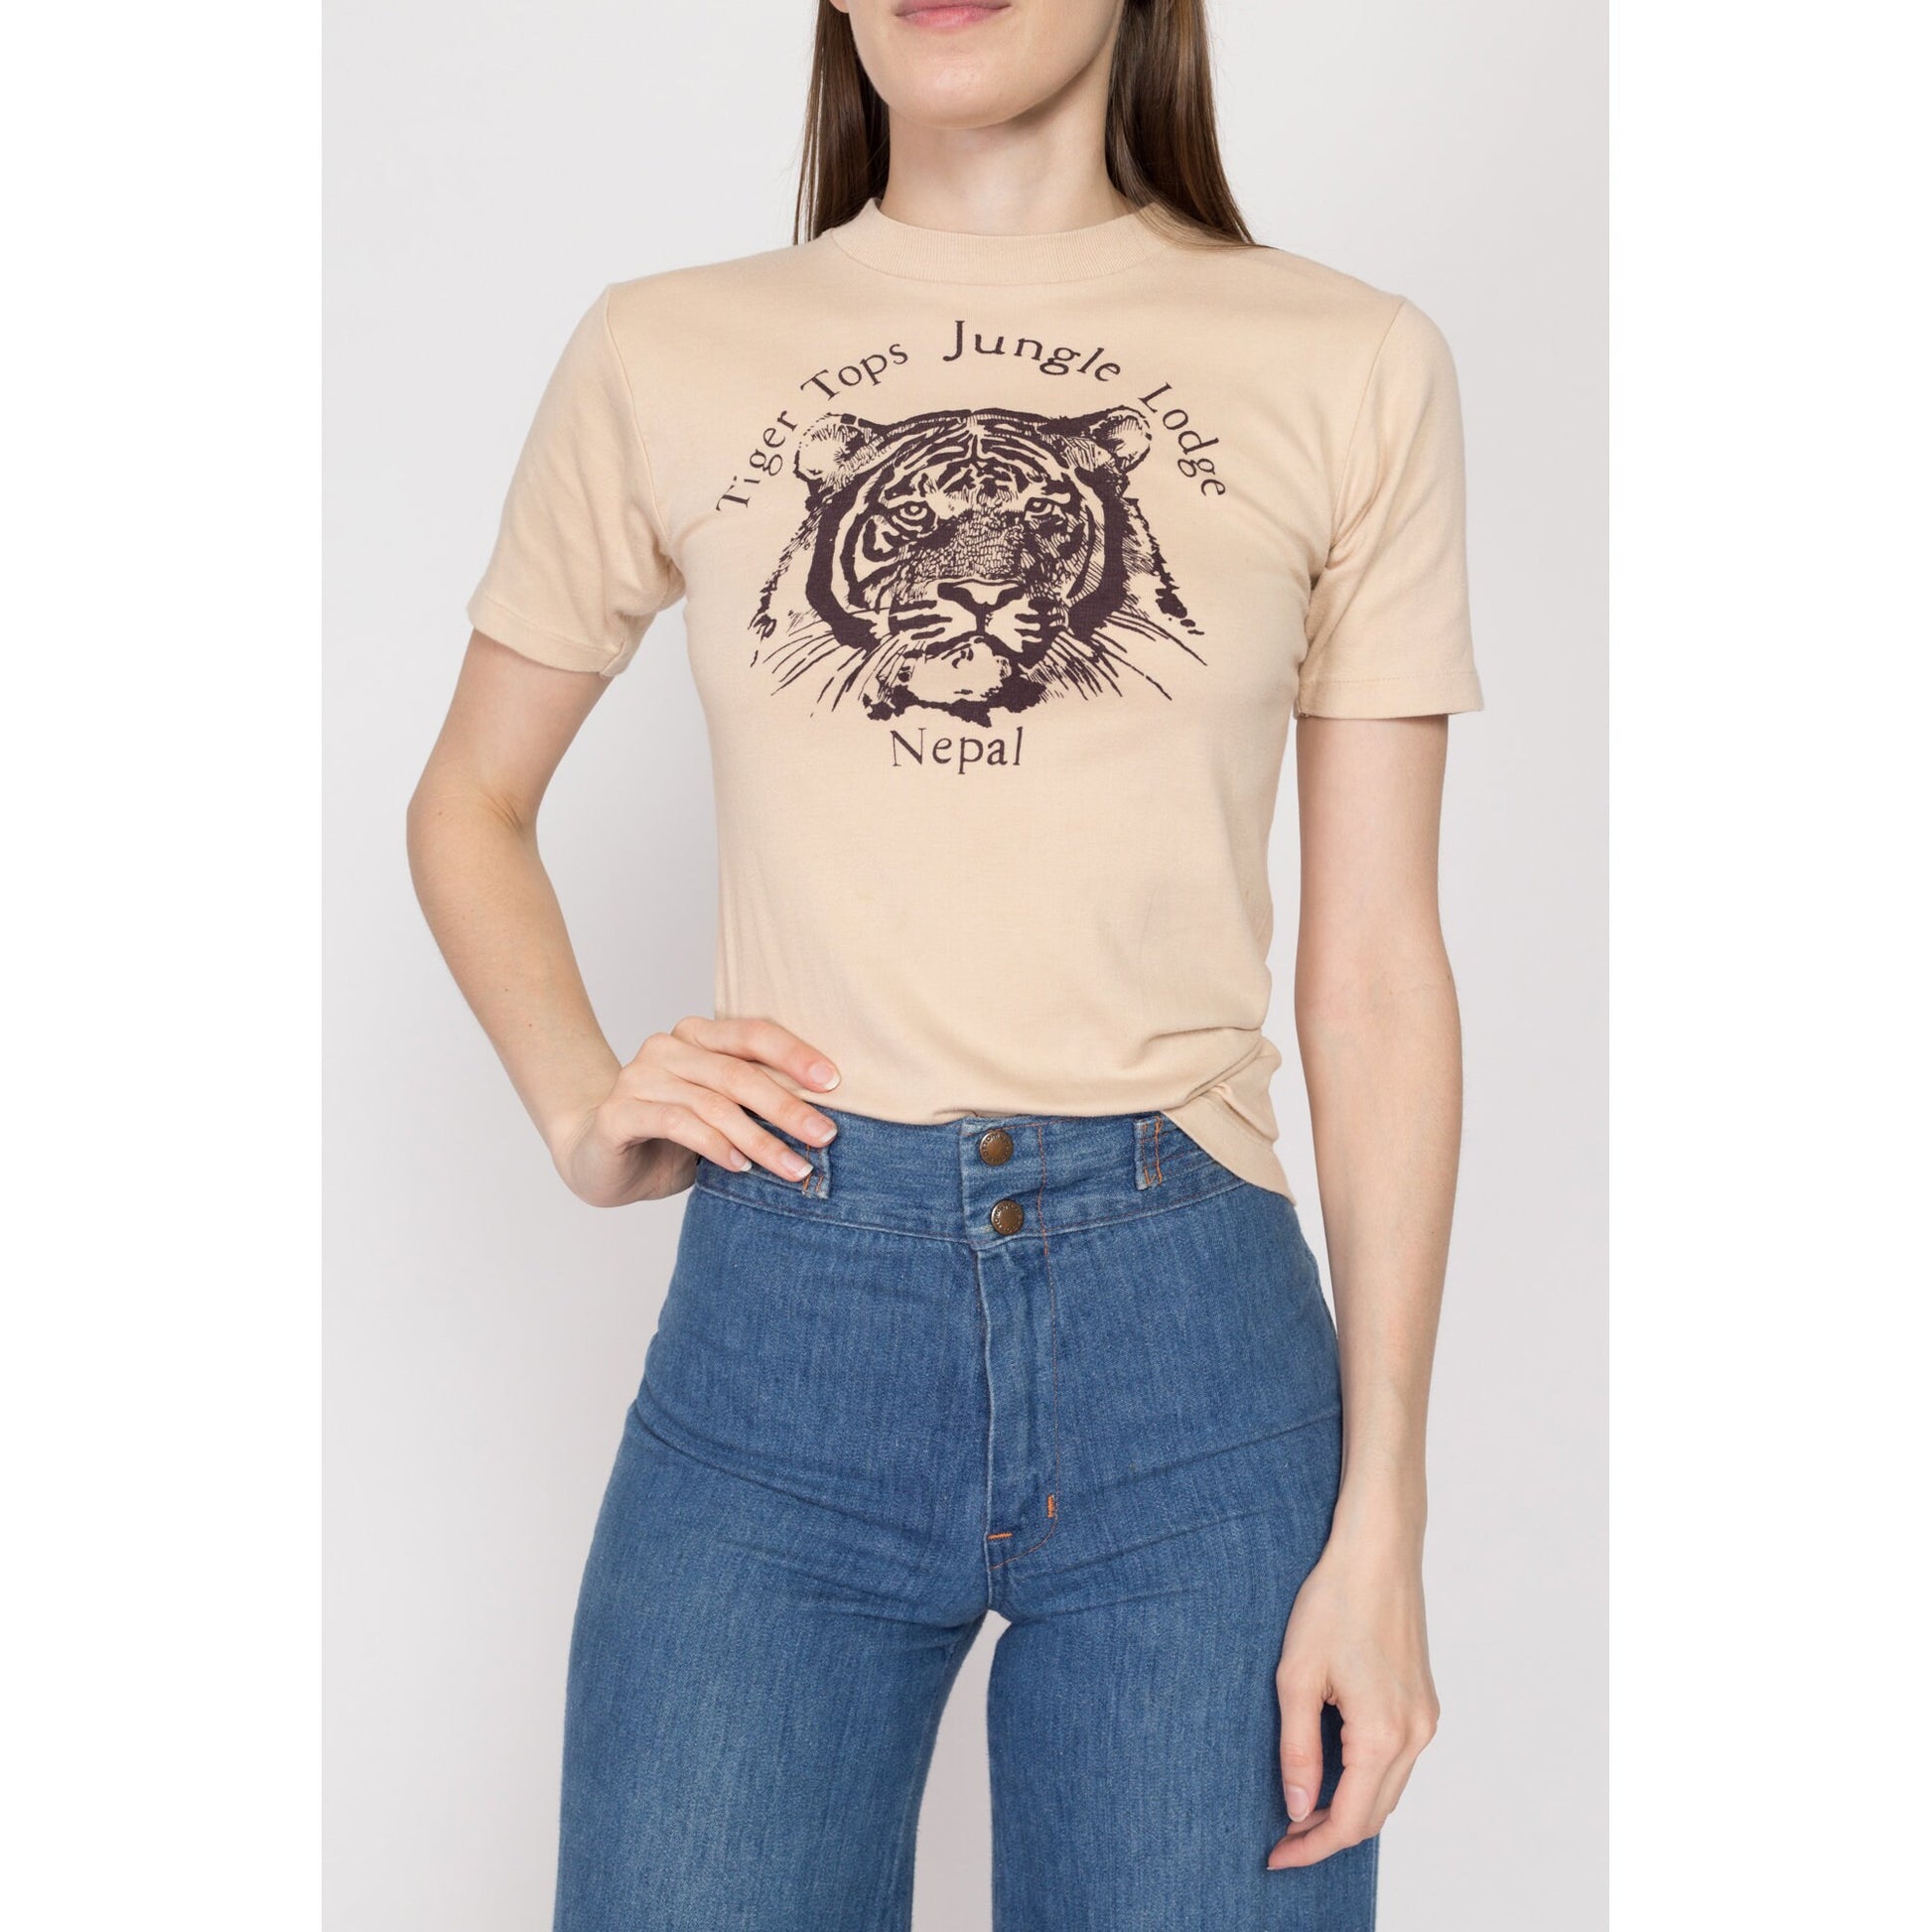 Small 80s Tiger Tops Jungle Lodge Nepal T Shirt | Vintage Tan Cotton Fitted Animal Graphic Tourist Tee